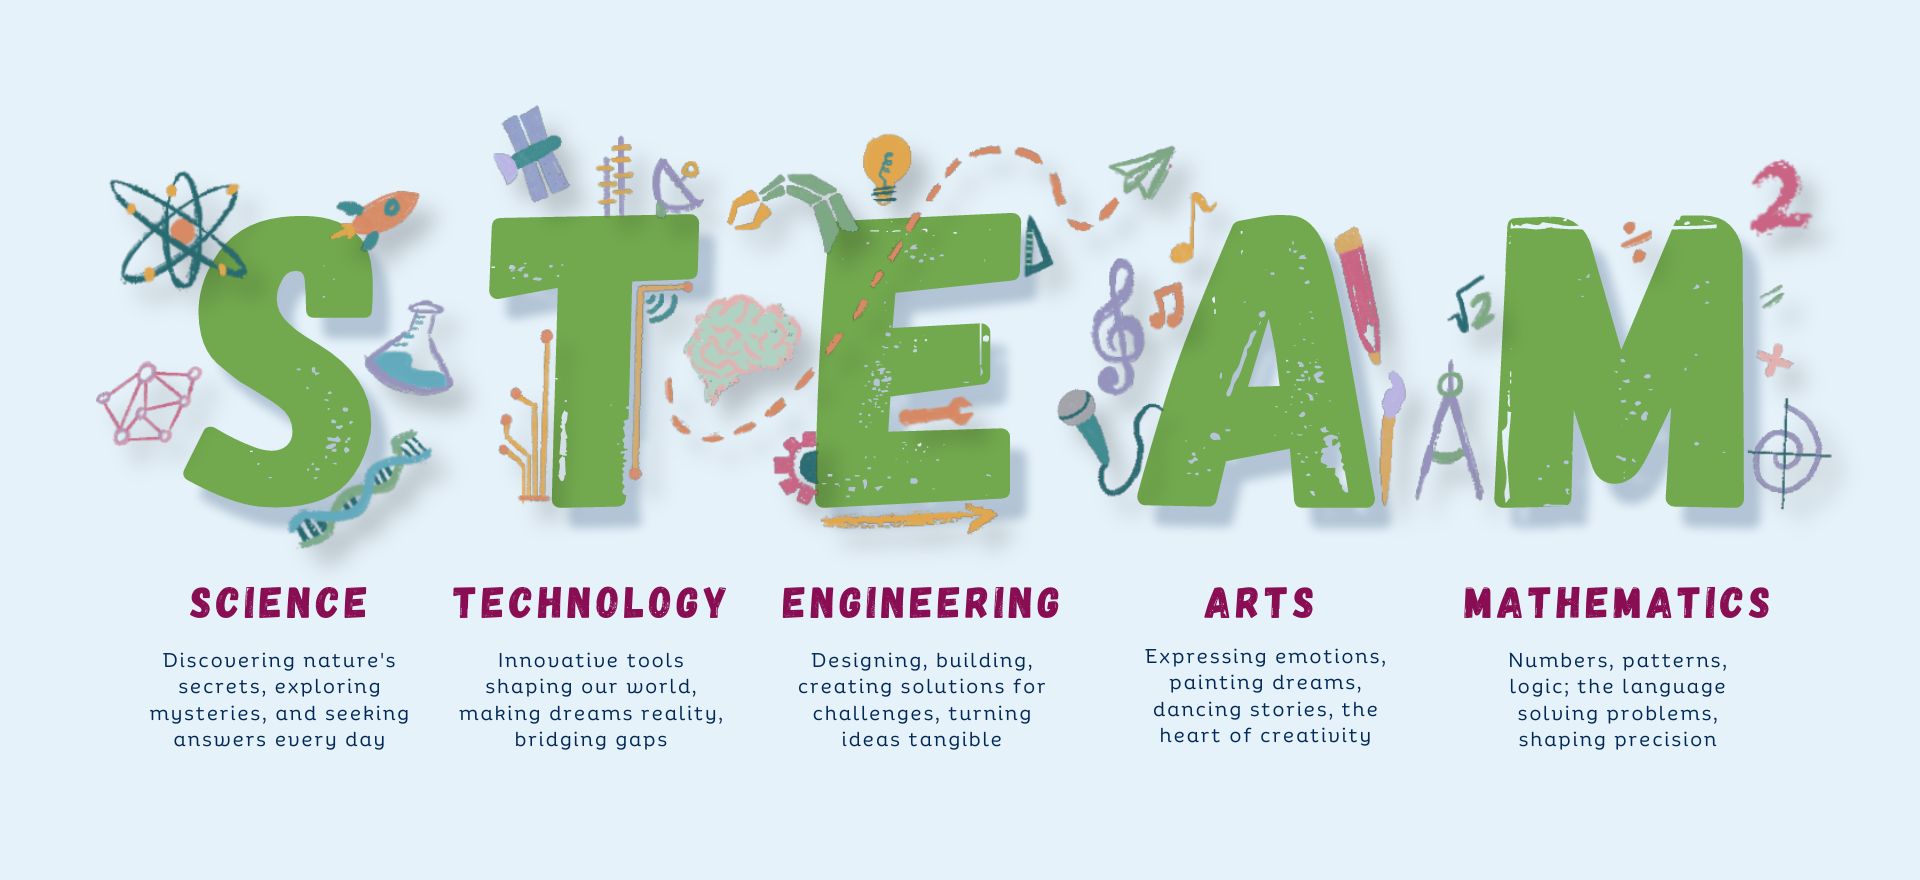 STEAM - Science, Technology, Engineering, Arts and Math